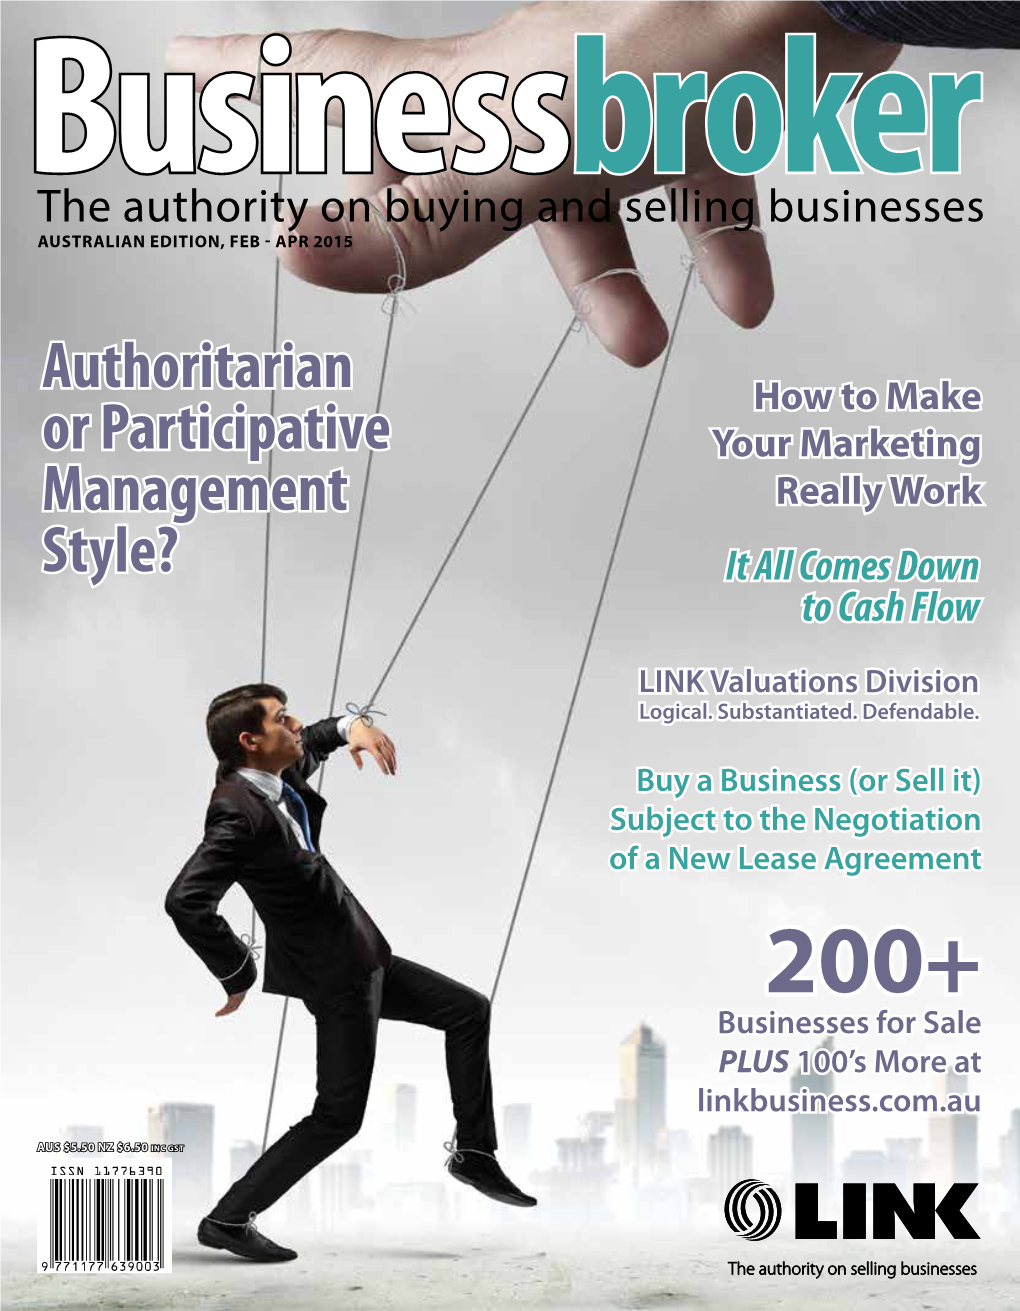 The Authority on Buying and Selling Businesses AUSTRALIAN EDITION, FEB - APR 2015